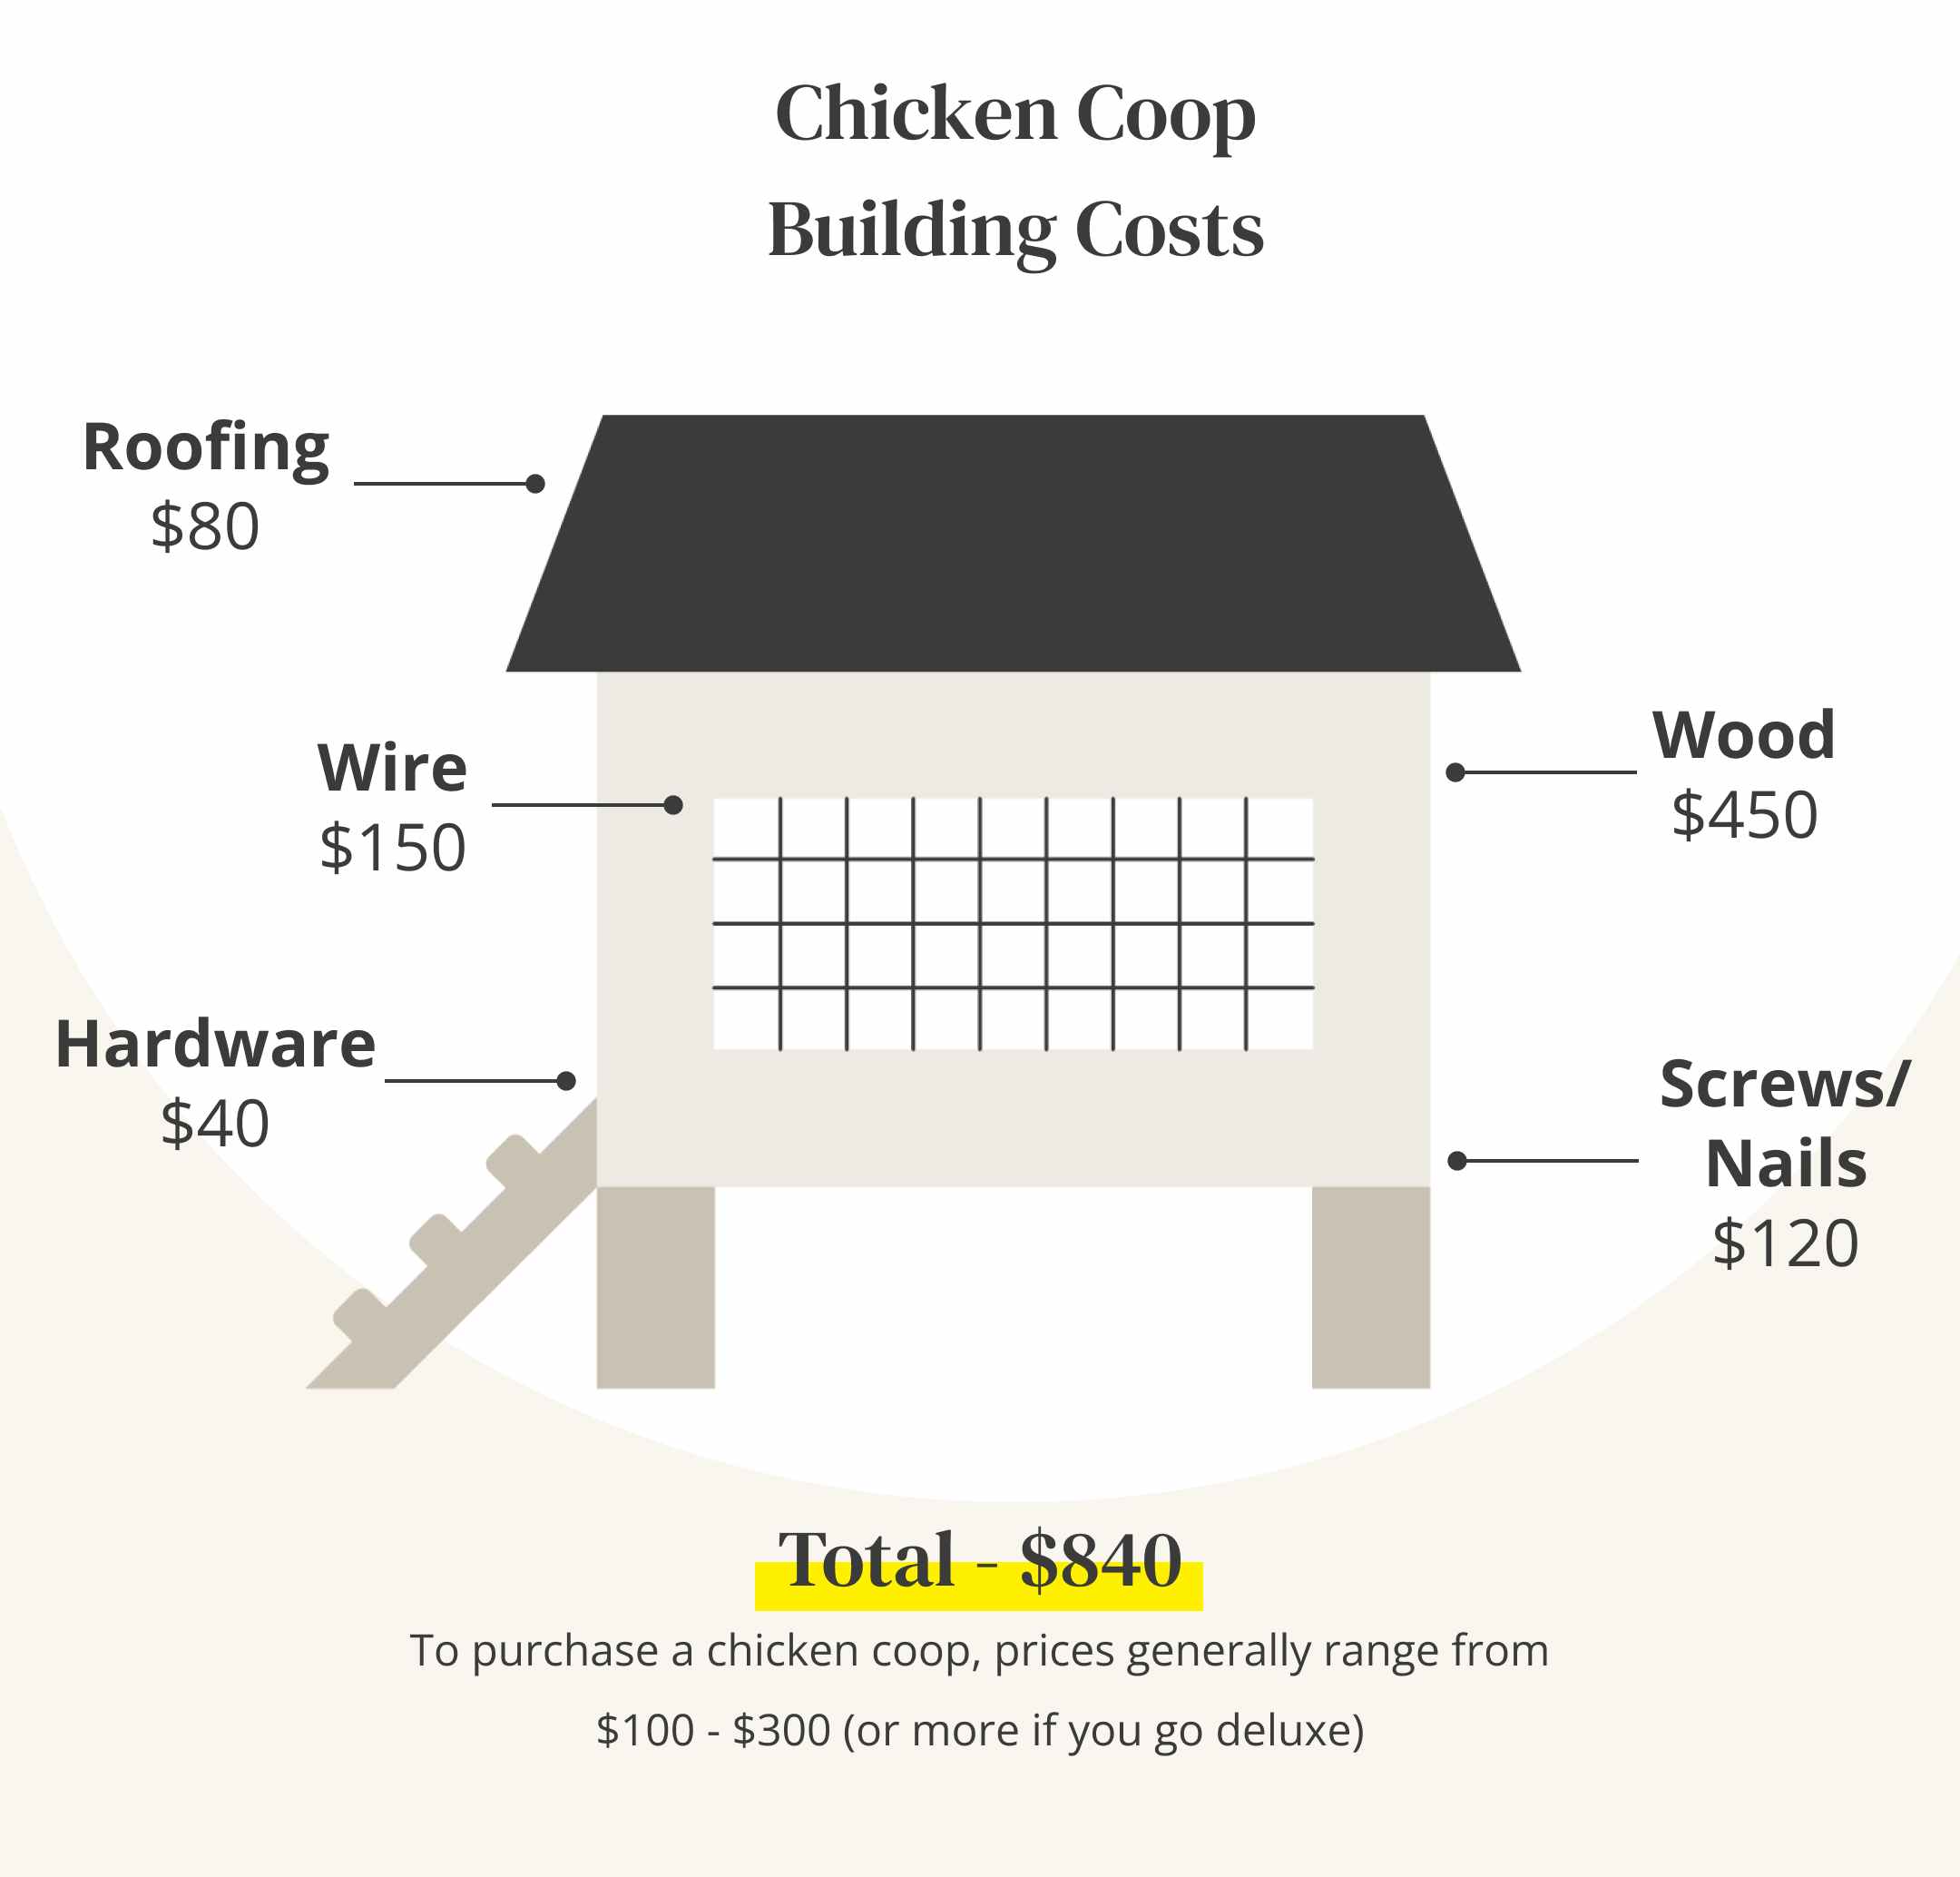 graphic showing the building costs for a chicken coop